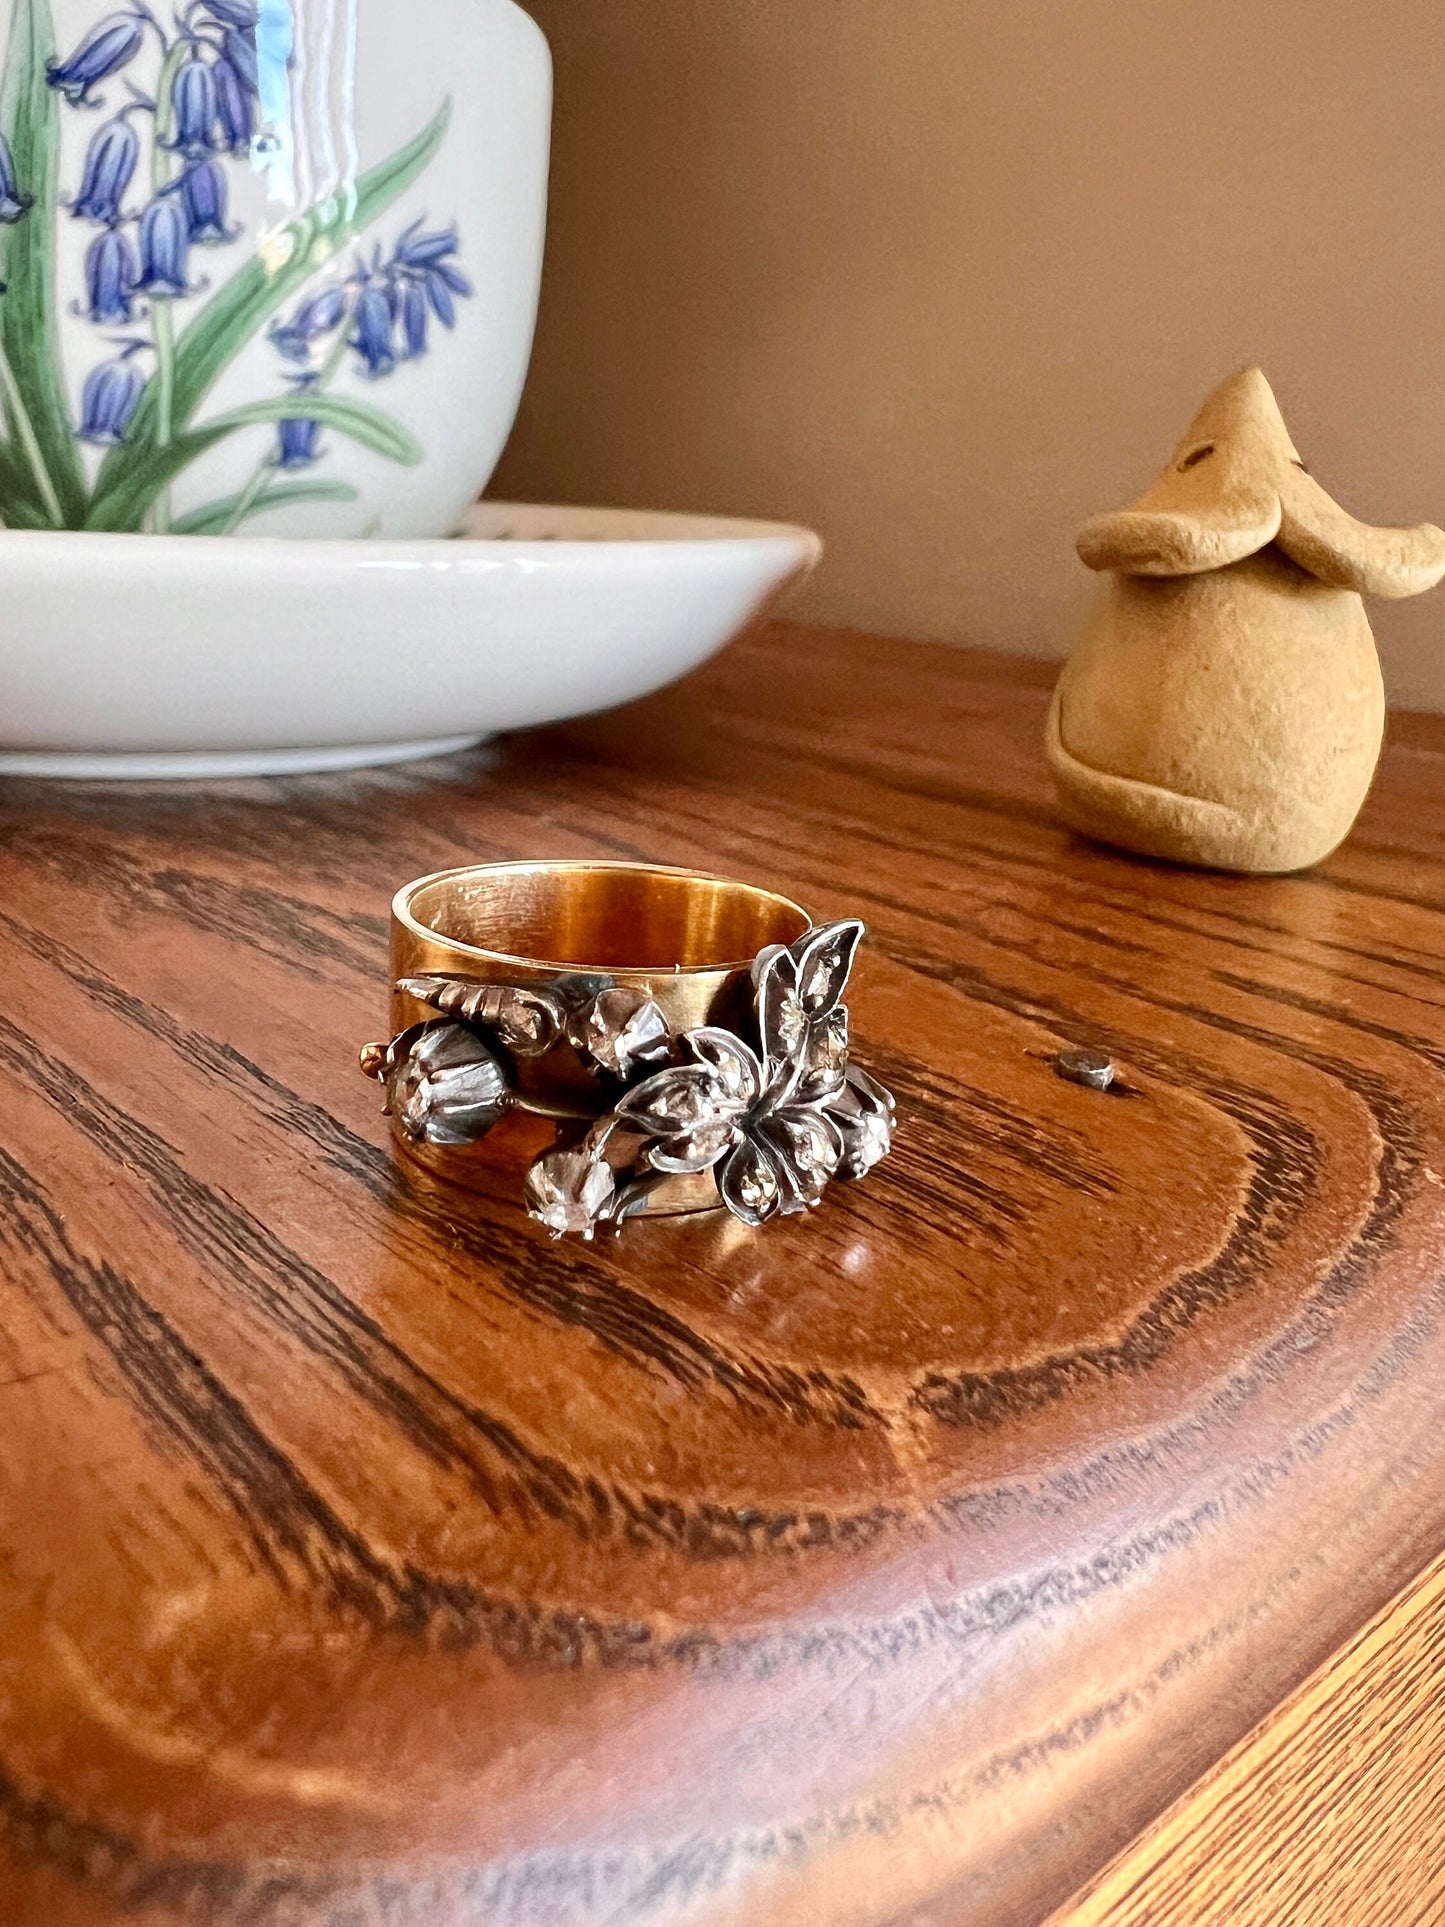 HEAVY Georgian Rose Cut DIAMOND Giardinetti Ring 11.1g 18k Gold 10mm Wide Cigar Band Silver Collets Floral Figural Leaf One of Kind Antique